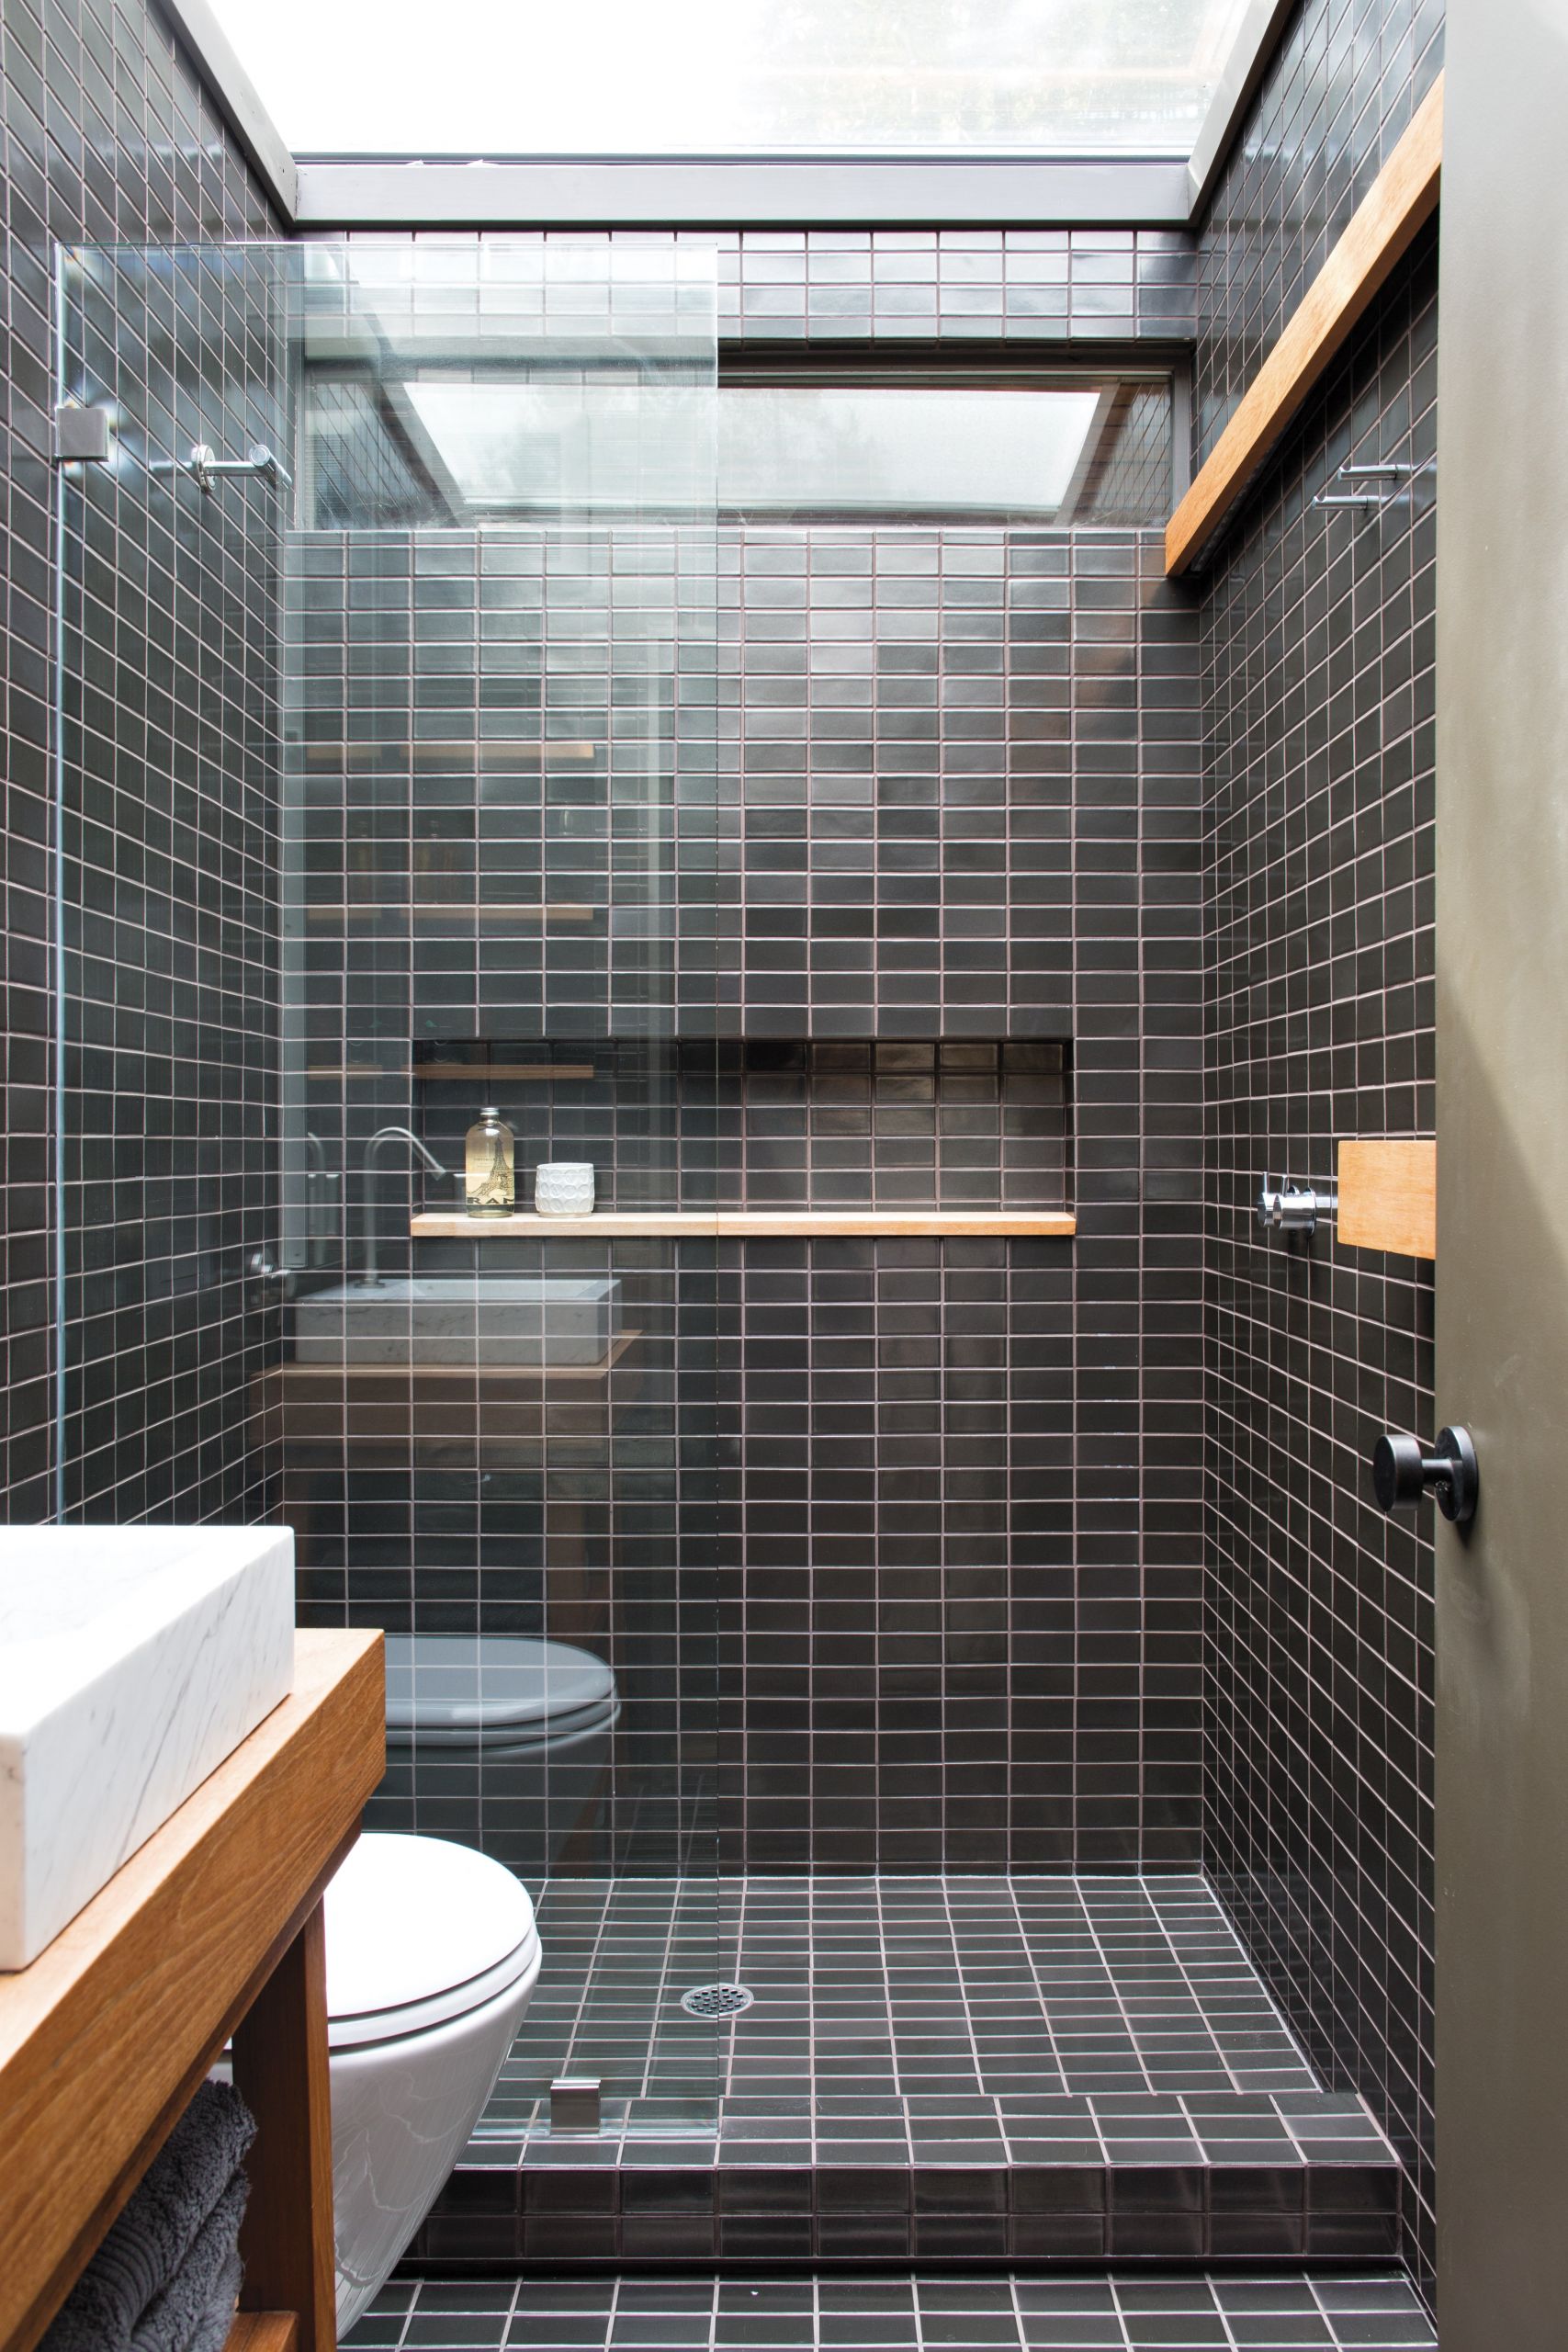 Bathroom Tiles Design Images
 How to Create the Bathroom Tile Design of Your Dreams